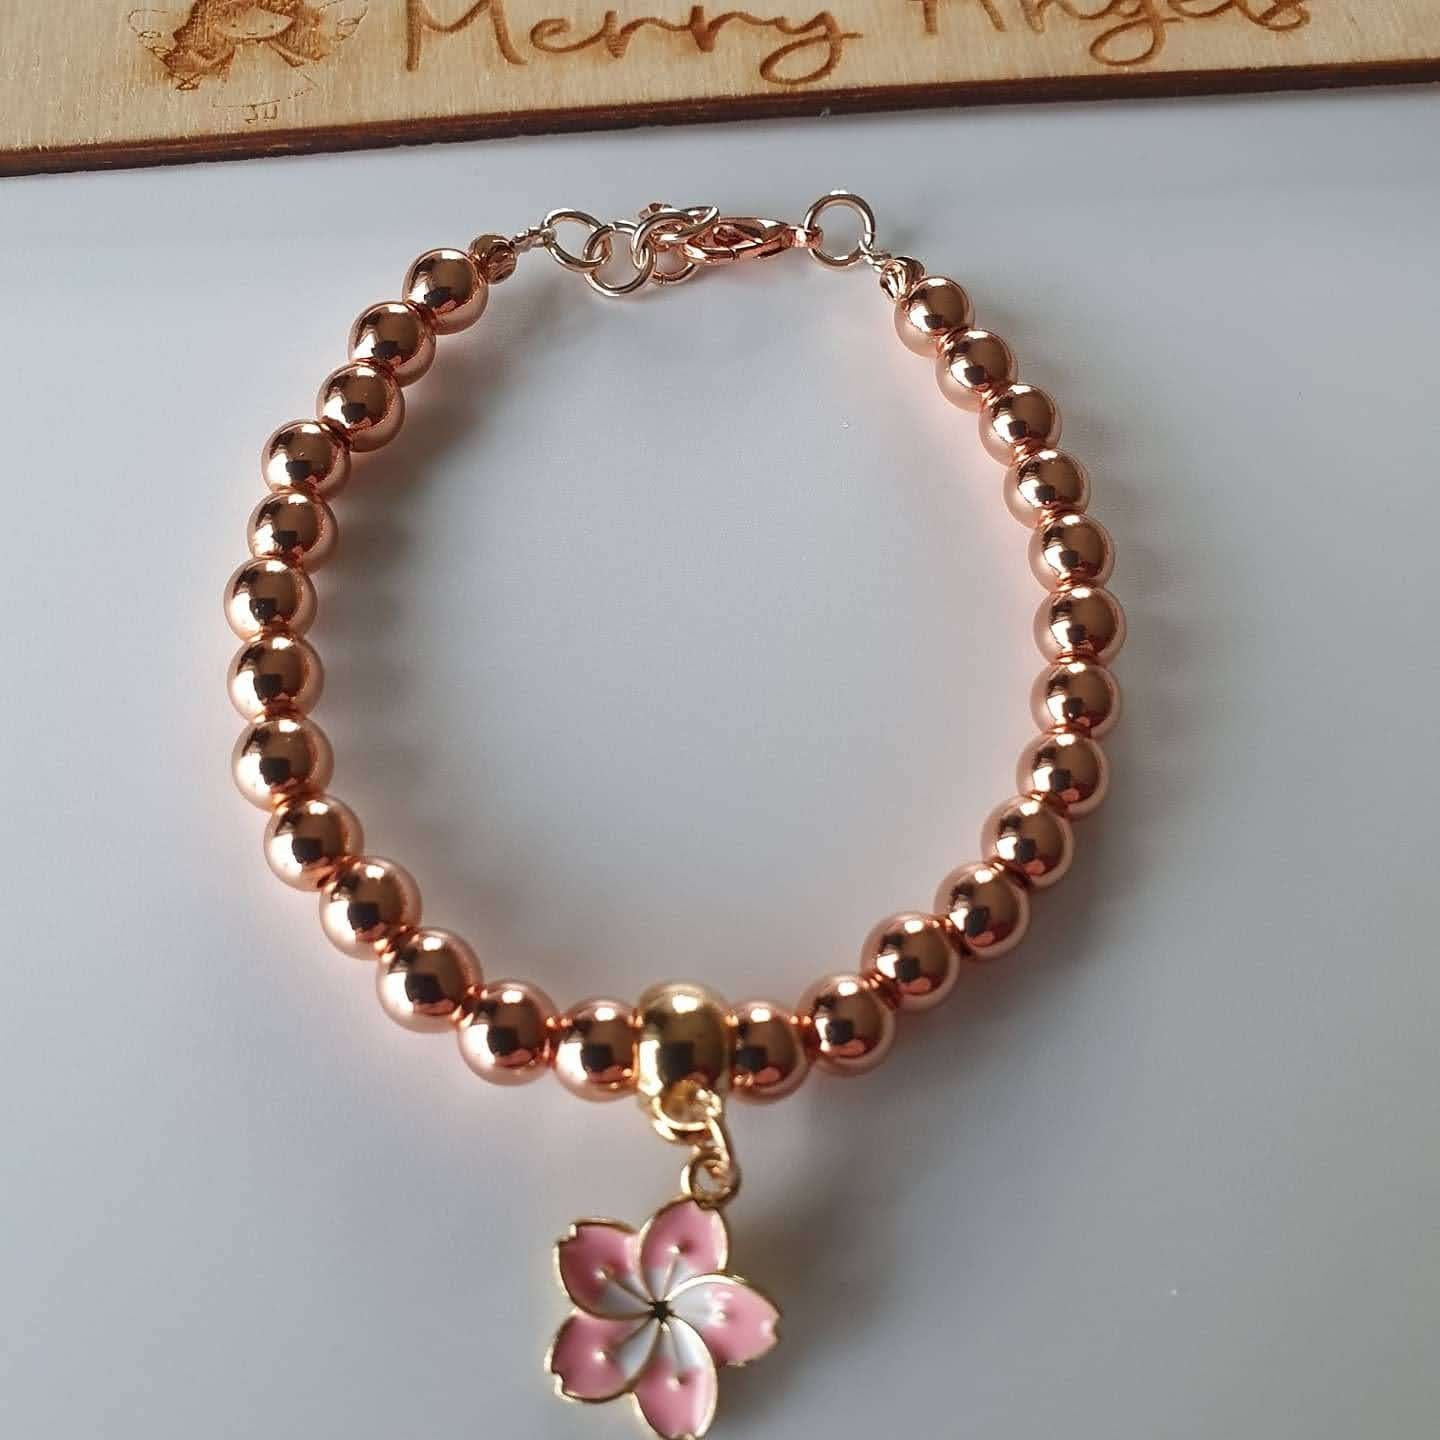 This is a picture of a rose gold bracelet with a  flower charm